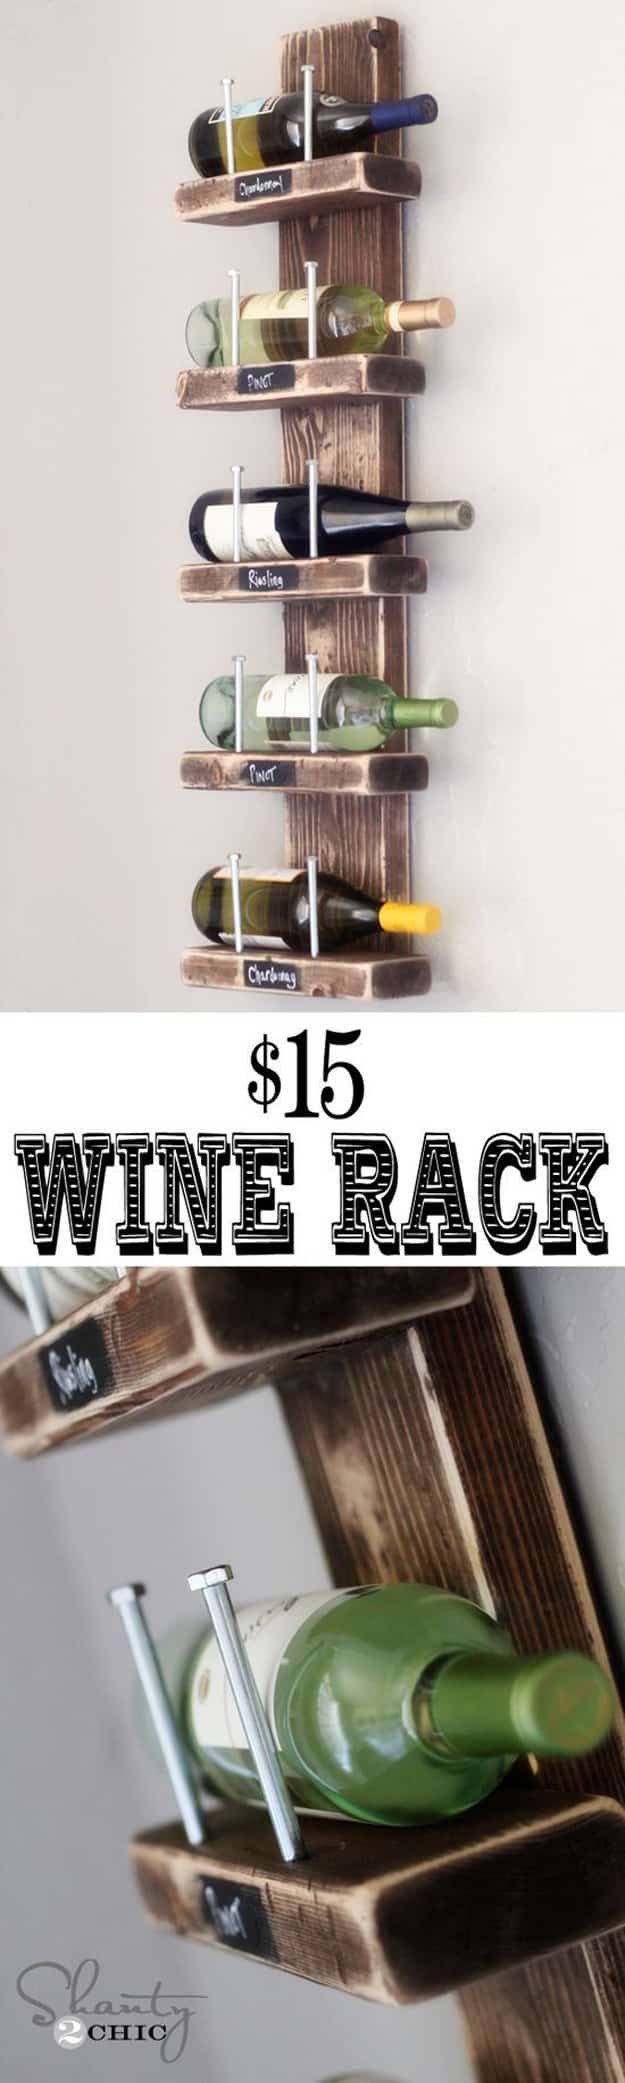 76 Crafts To Make and Sell - Easy DIY Ideas for Cheap Things To Sell on Etsy, Online and for Craft Fairs. Make Money with These Homemade Crafts for Teens, Kids, Christmas, Summer, Mother’s Day Gifts. | Chalkboard Label Wine Rack #crafts #diy